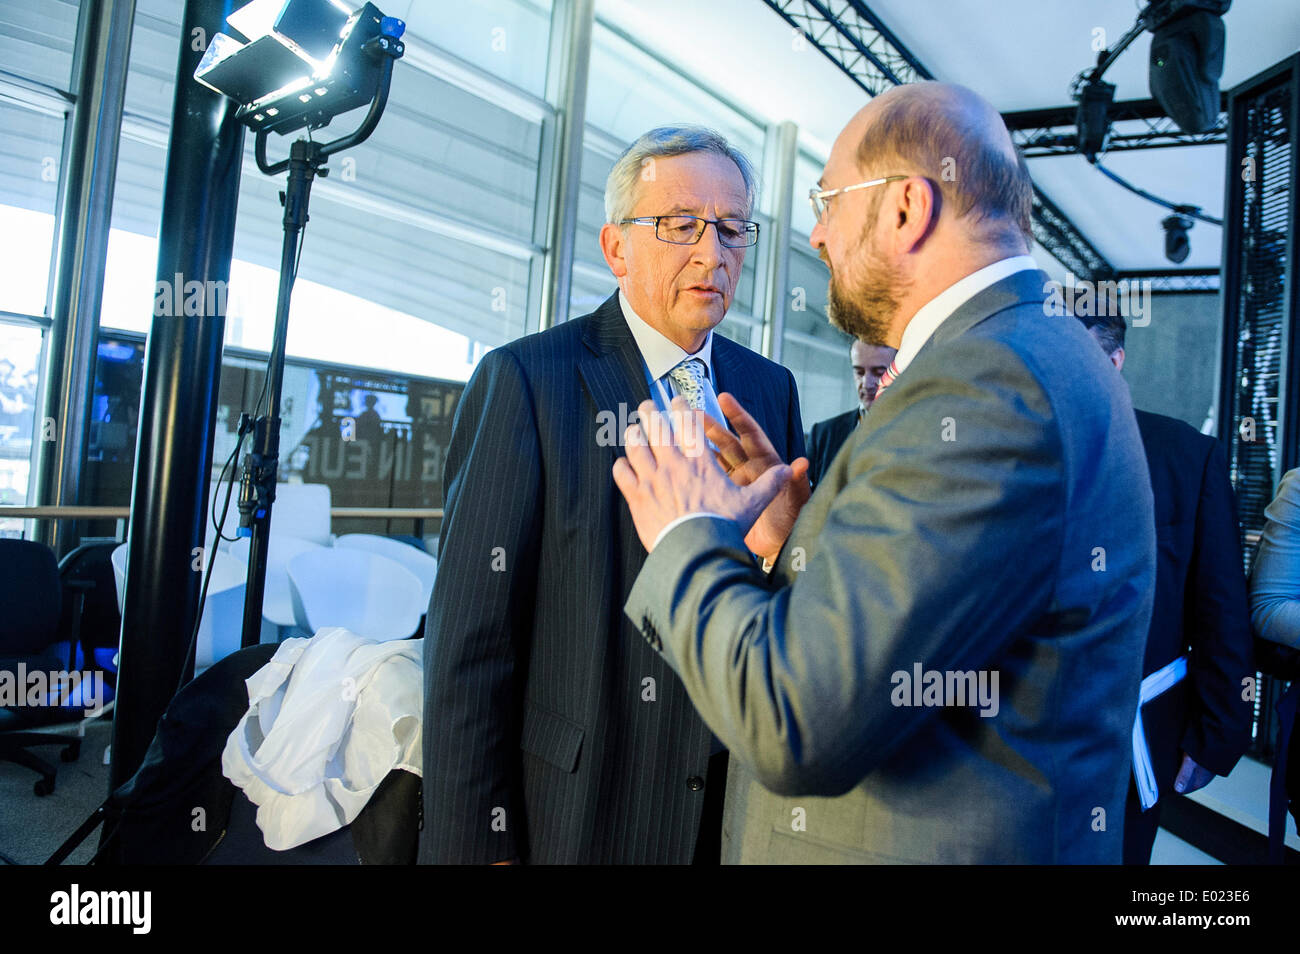 Brussels, Bxl, Belgium. 29th Apr, 2014. Martin Schulz (L), top candidate of the Party of European Socialists (PSE) and Jean-Claude Juncker, top candidate for European People's Party (EPP), talk ahead of Euranet's 'Big Crunch' Presidential debate at the EU parliament in Brussels, Belgium on 29.04.2014 The four top candidates for the presidency of the European Commission - Jean-Claude Juncker, Ska Keller, Martin Schulz and Guy Verhofstadt - attend EU-wide debate organized by EuranetPlus and focused on the major election topics. by Wiktor Dabkowski (Credit Image: © Wiktor Dabkowski/ZUMAPRESS. Stock Photo